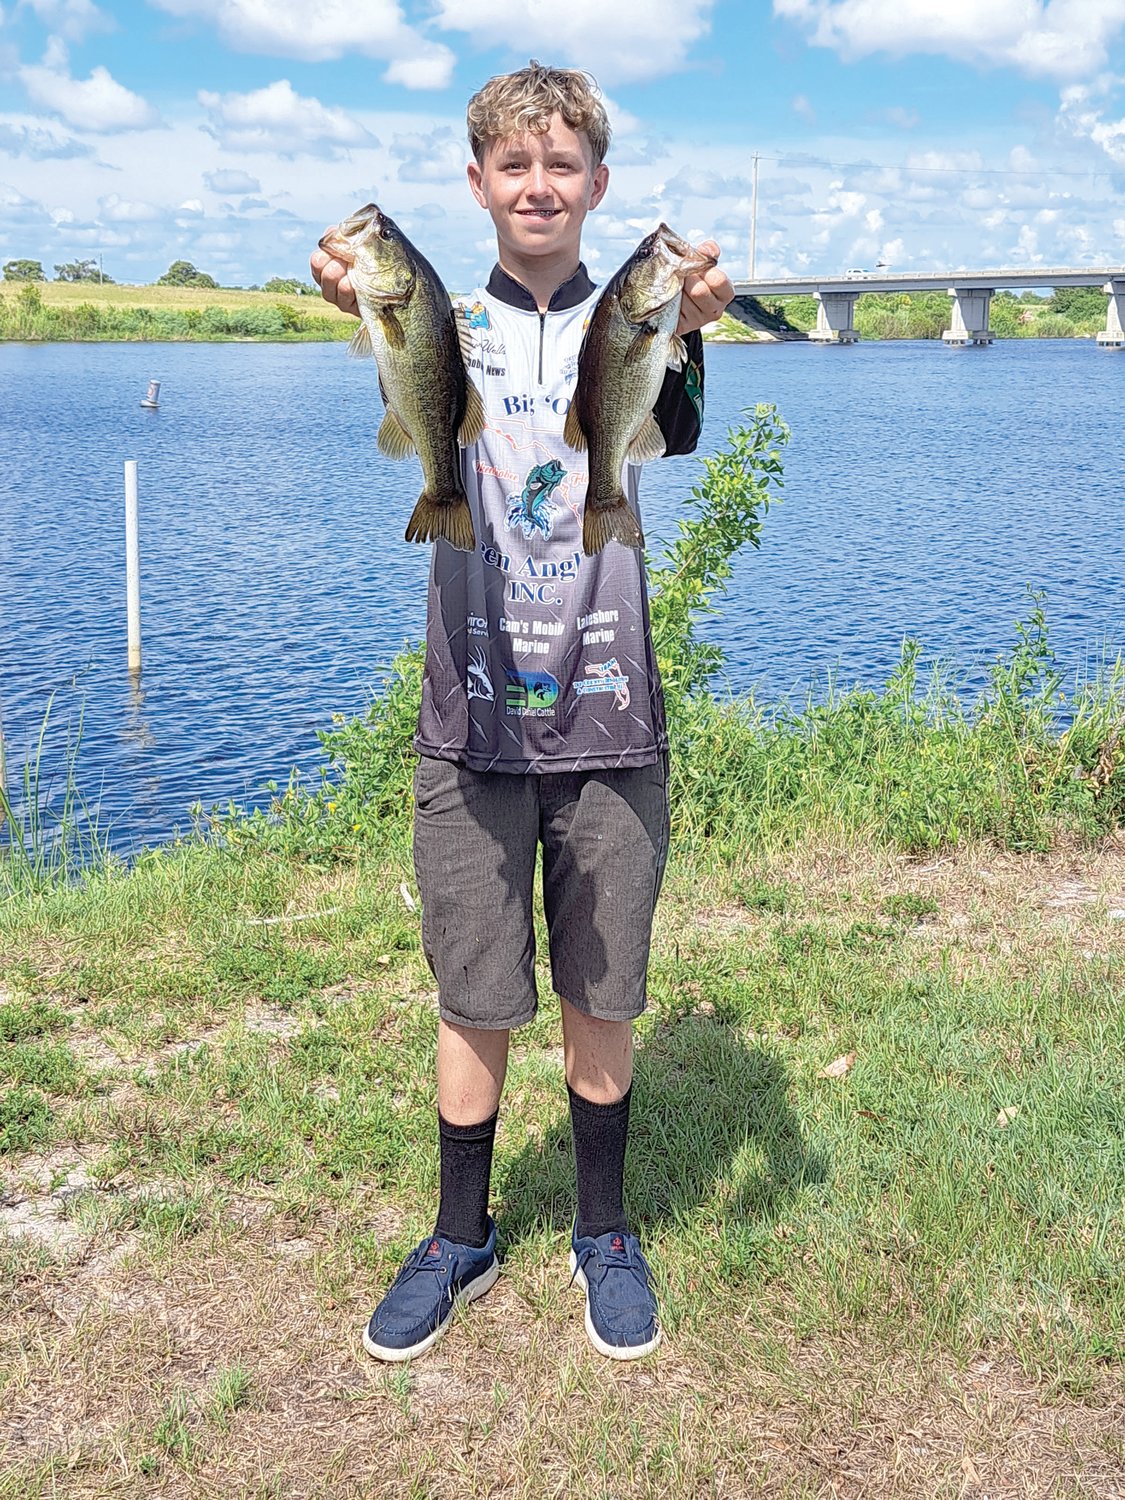 Jayson Wells placed second in the 14-19 Age Group with 2.96 pounds.